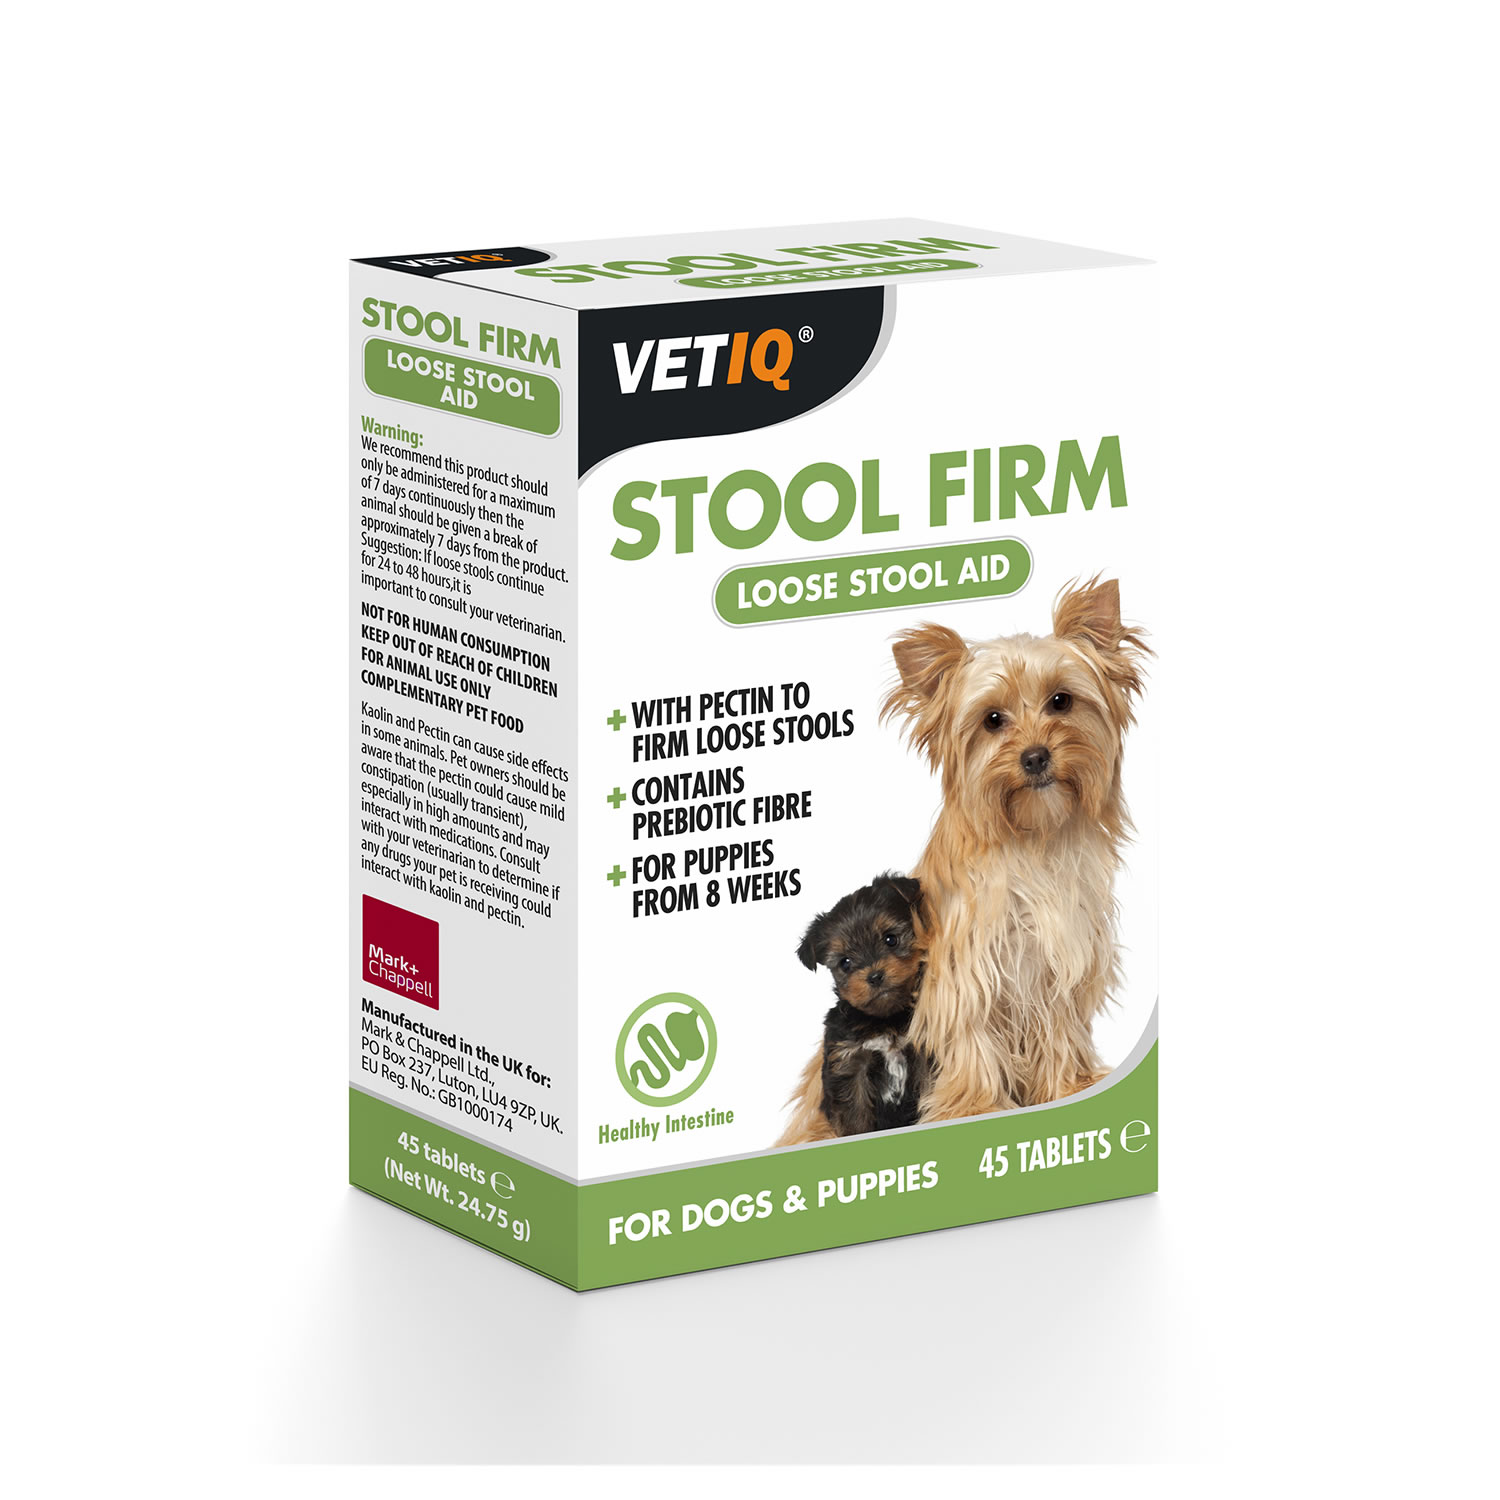 VETIQ STOOL FIRM TABLETS FOR DOGS & PUPPIES 45 PACK